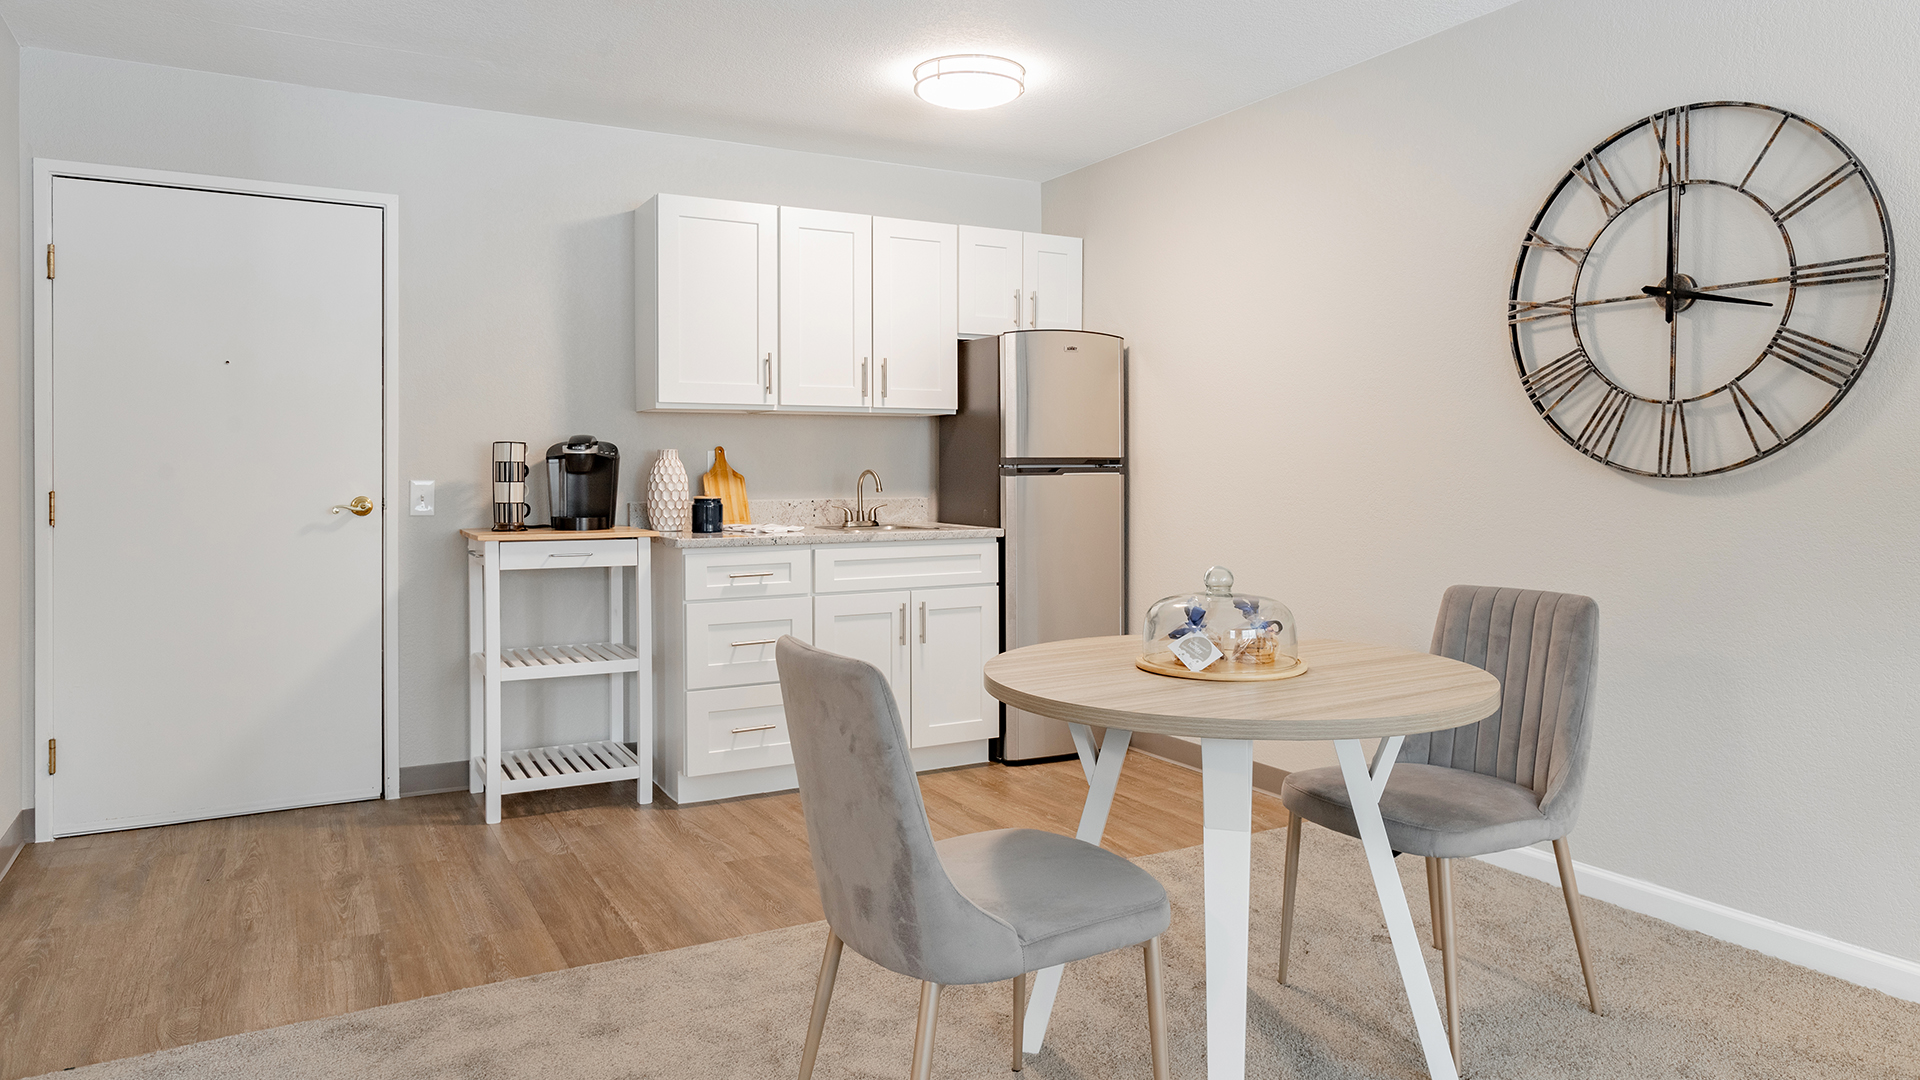 Holiday Parkwood Estates apartment kitchenette with two chair settee, small refrigerator, and cabinets for storage